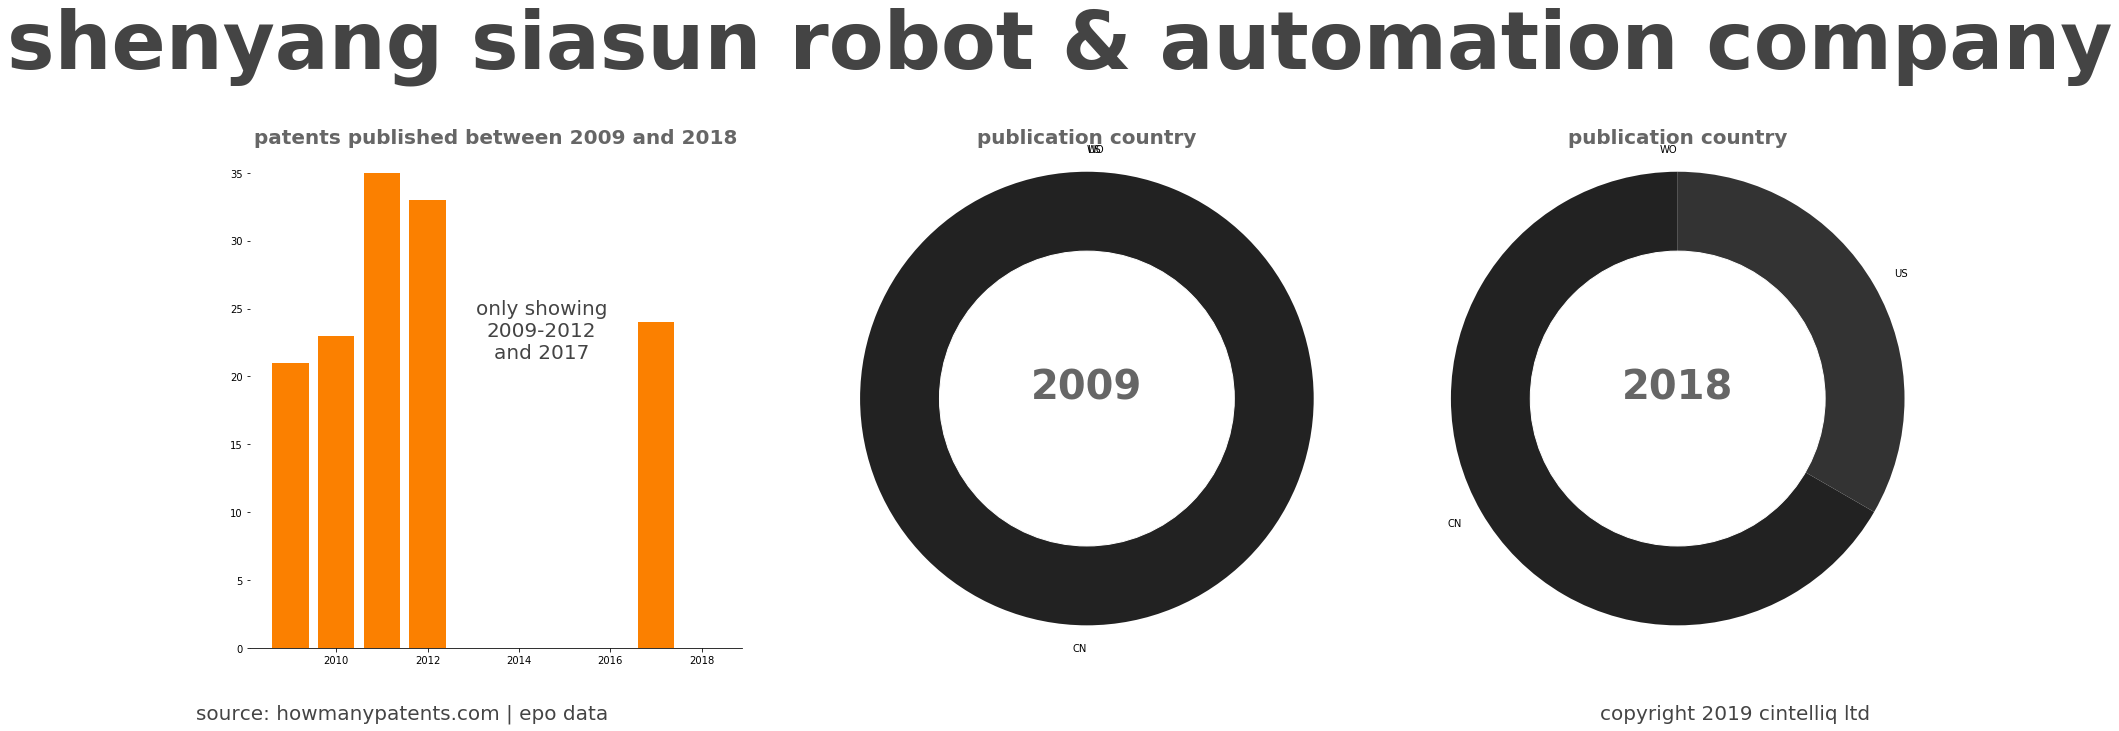 summary of patents for Shenyang Siasun Robot & Automation Company